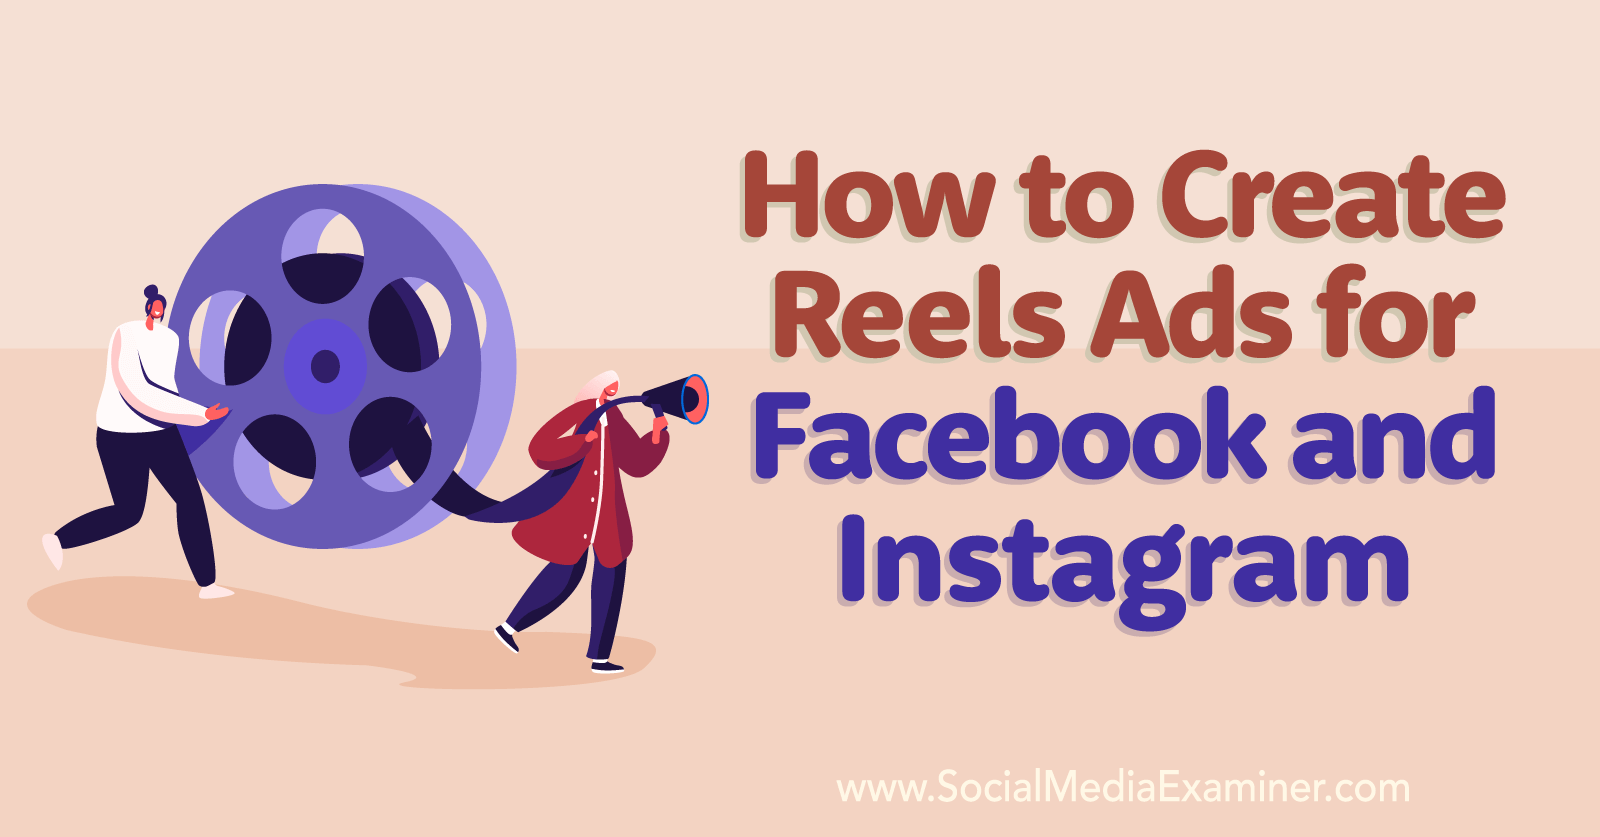 How to Create Reels Ads for Facebook and Instagram : Social Media Examiner